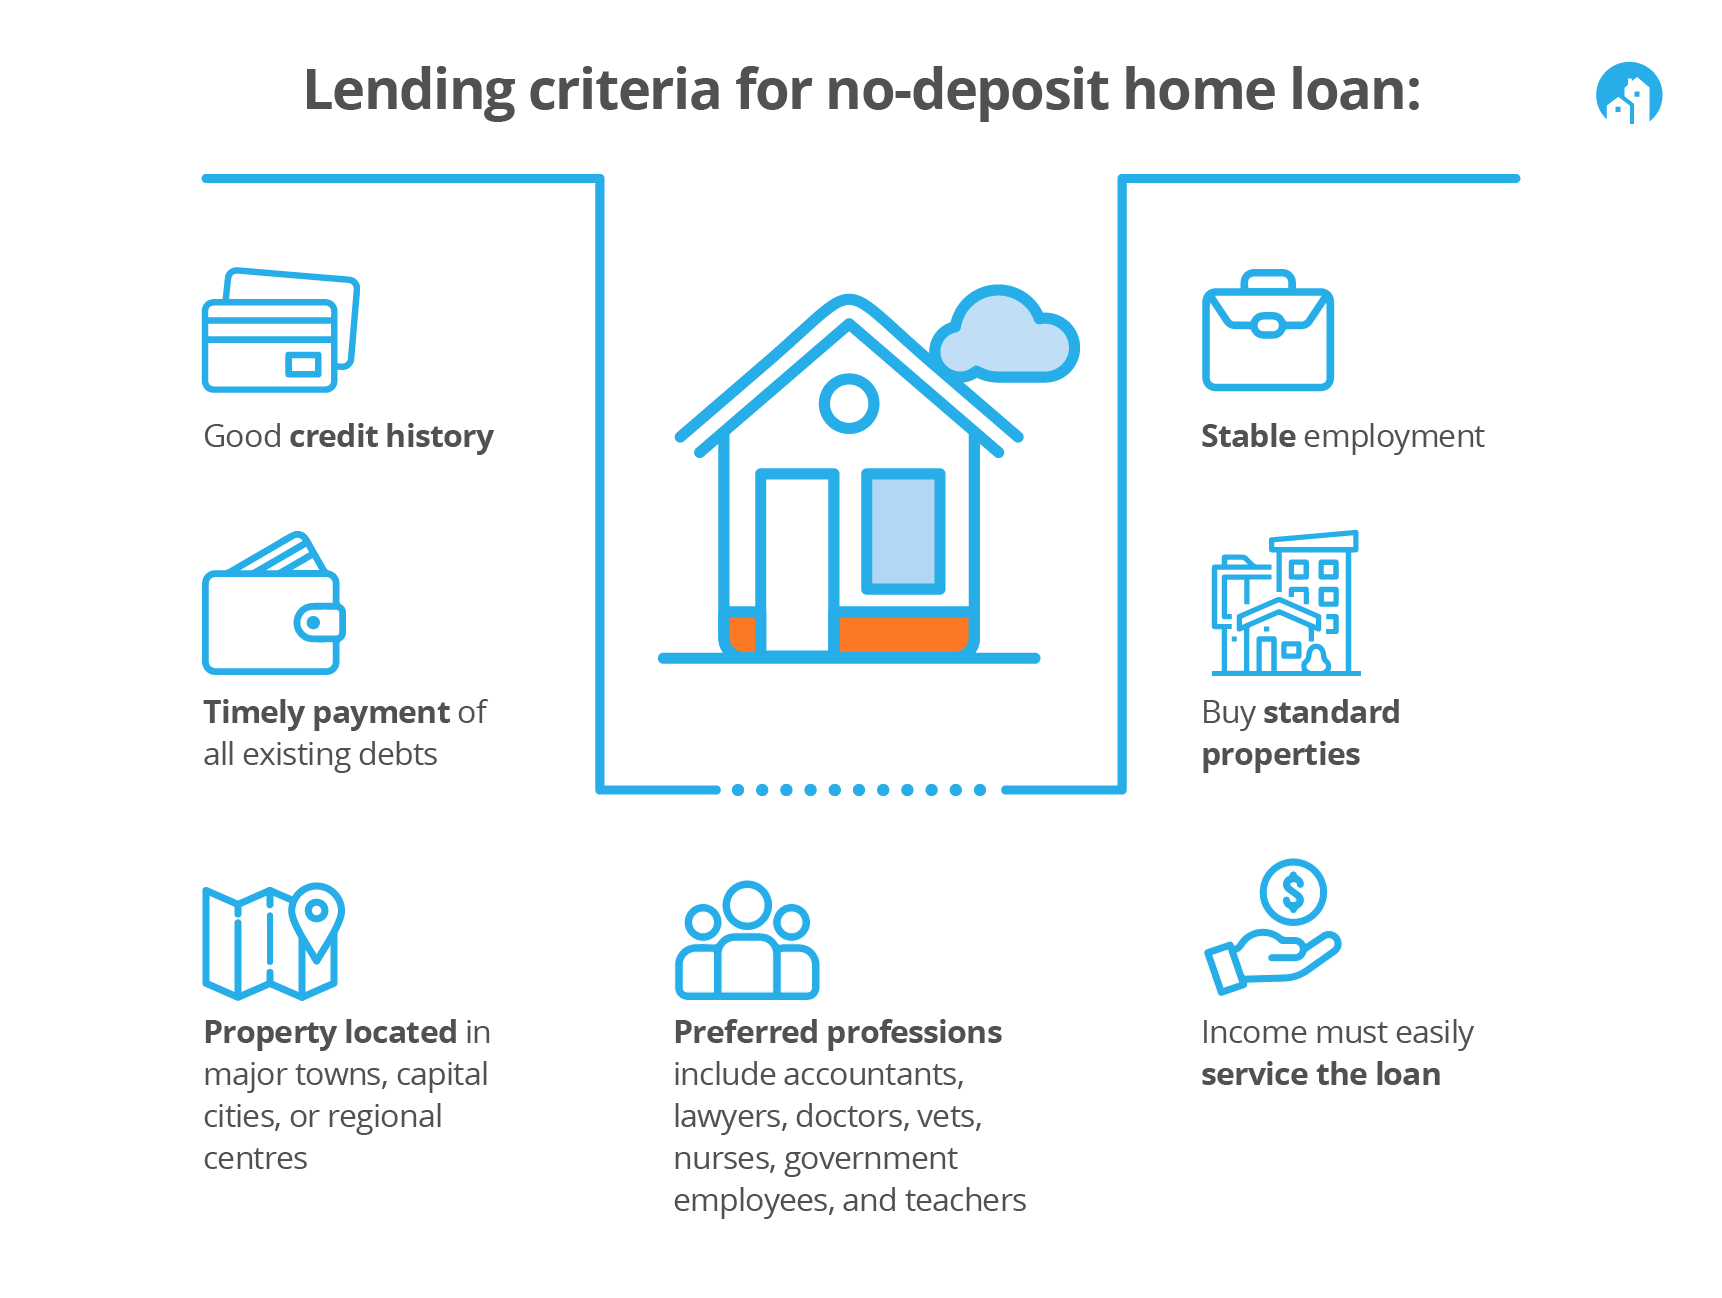 The six leading criteria to qualify for a no-deposit home loan